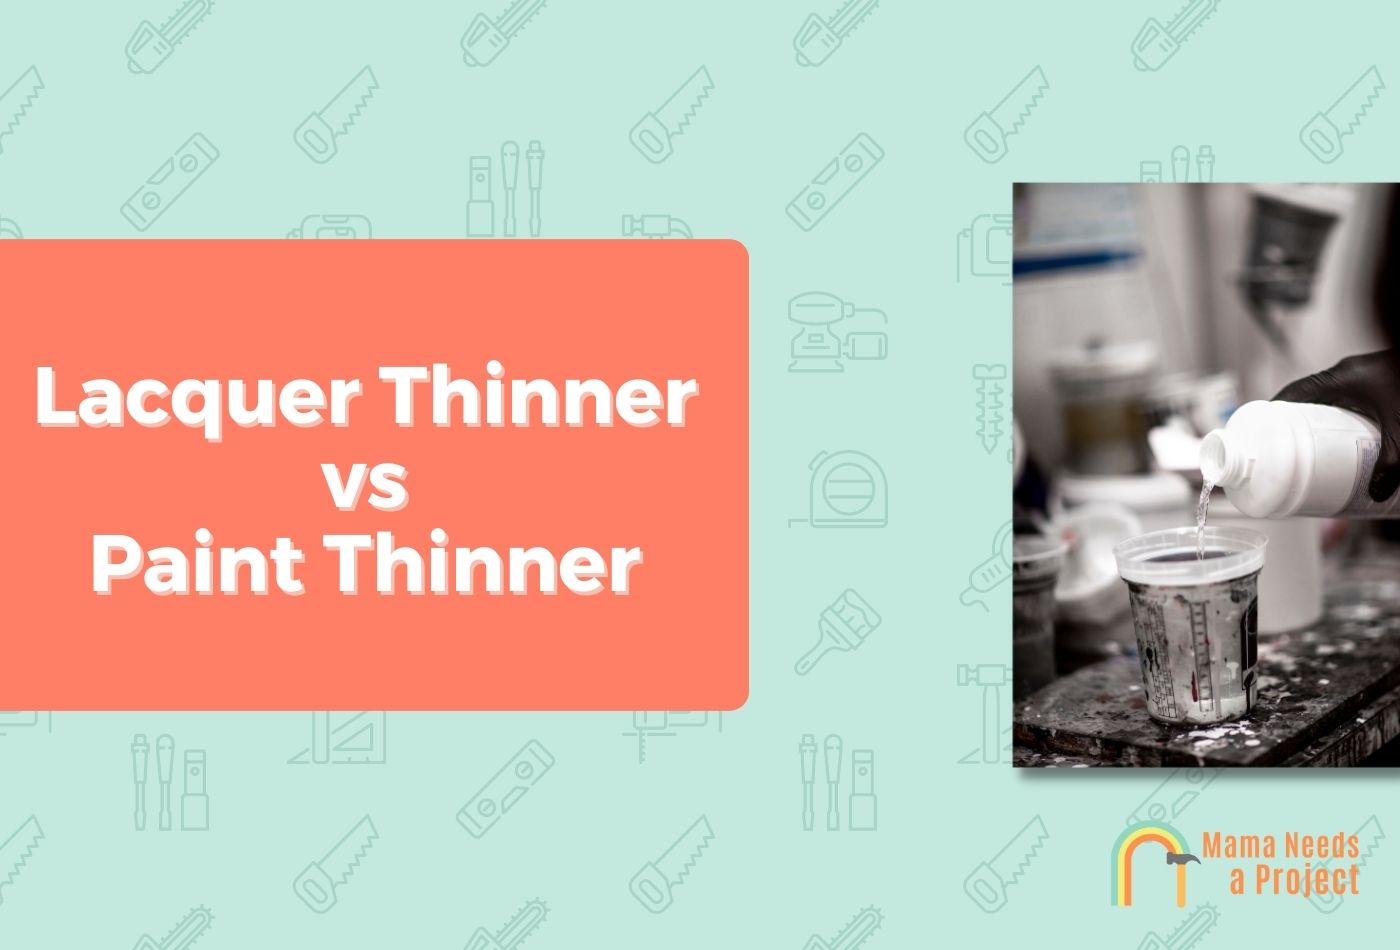 Lacquer Thinner vs Paint Thinner